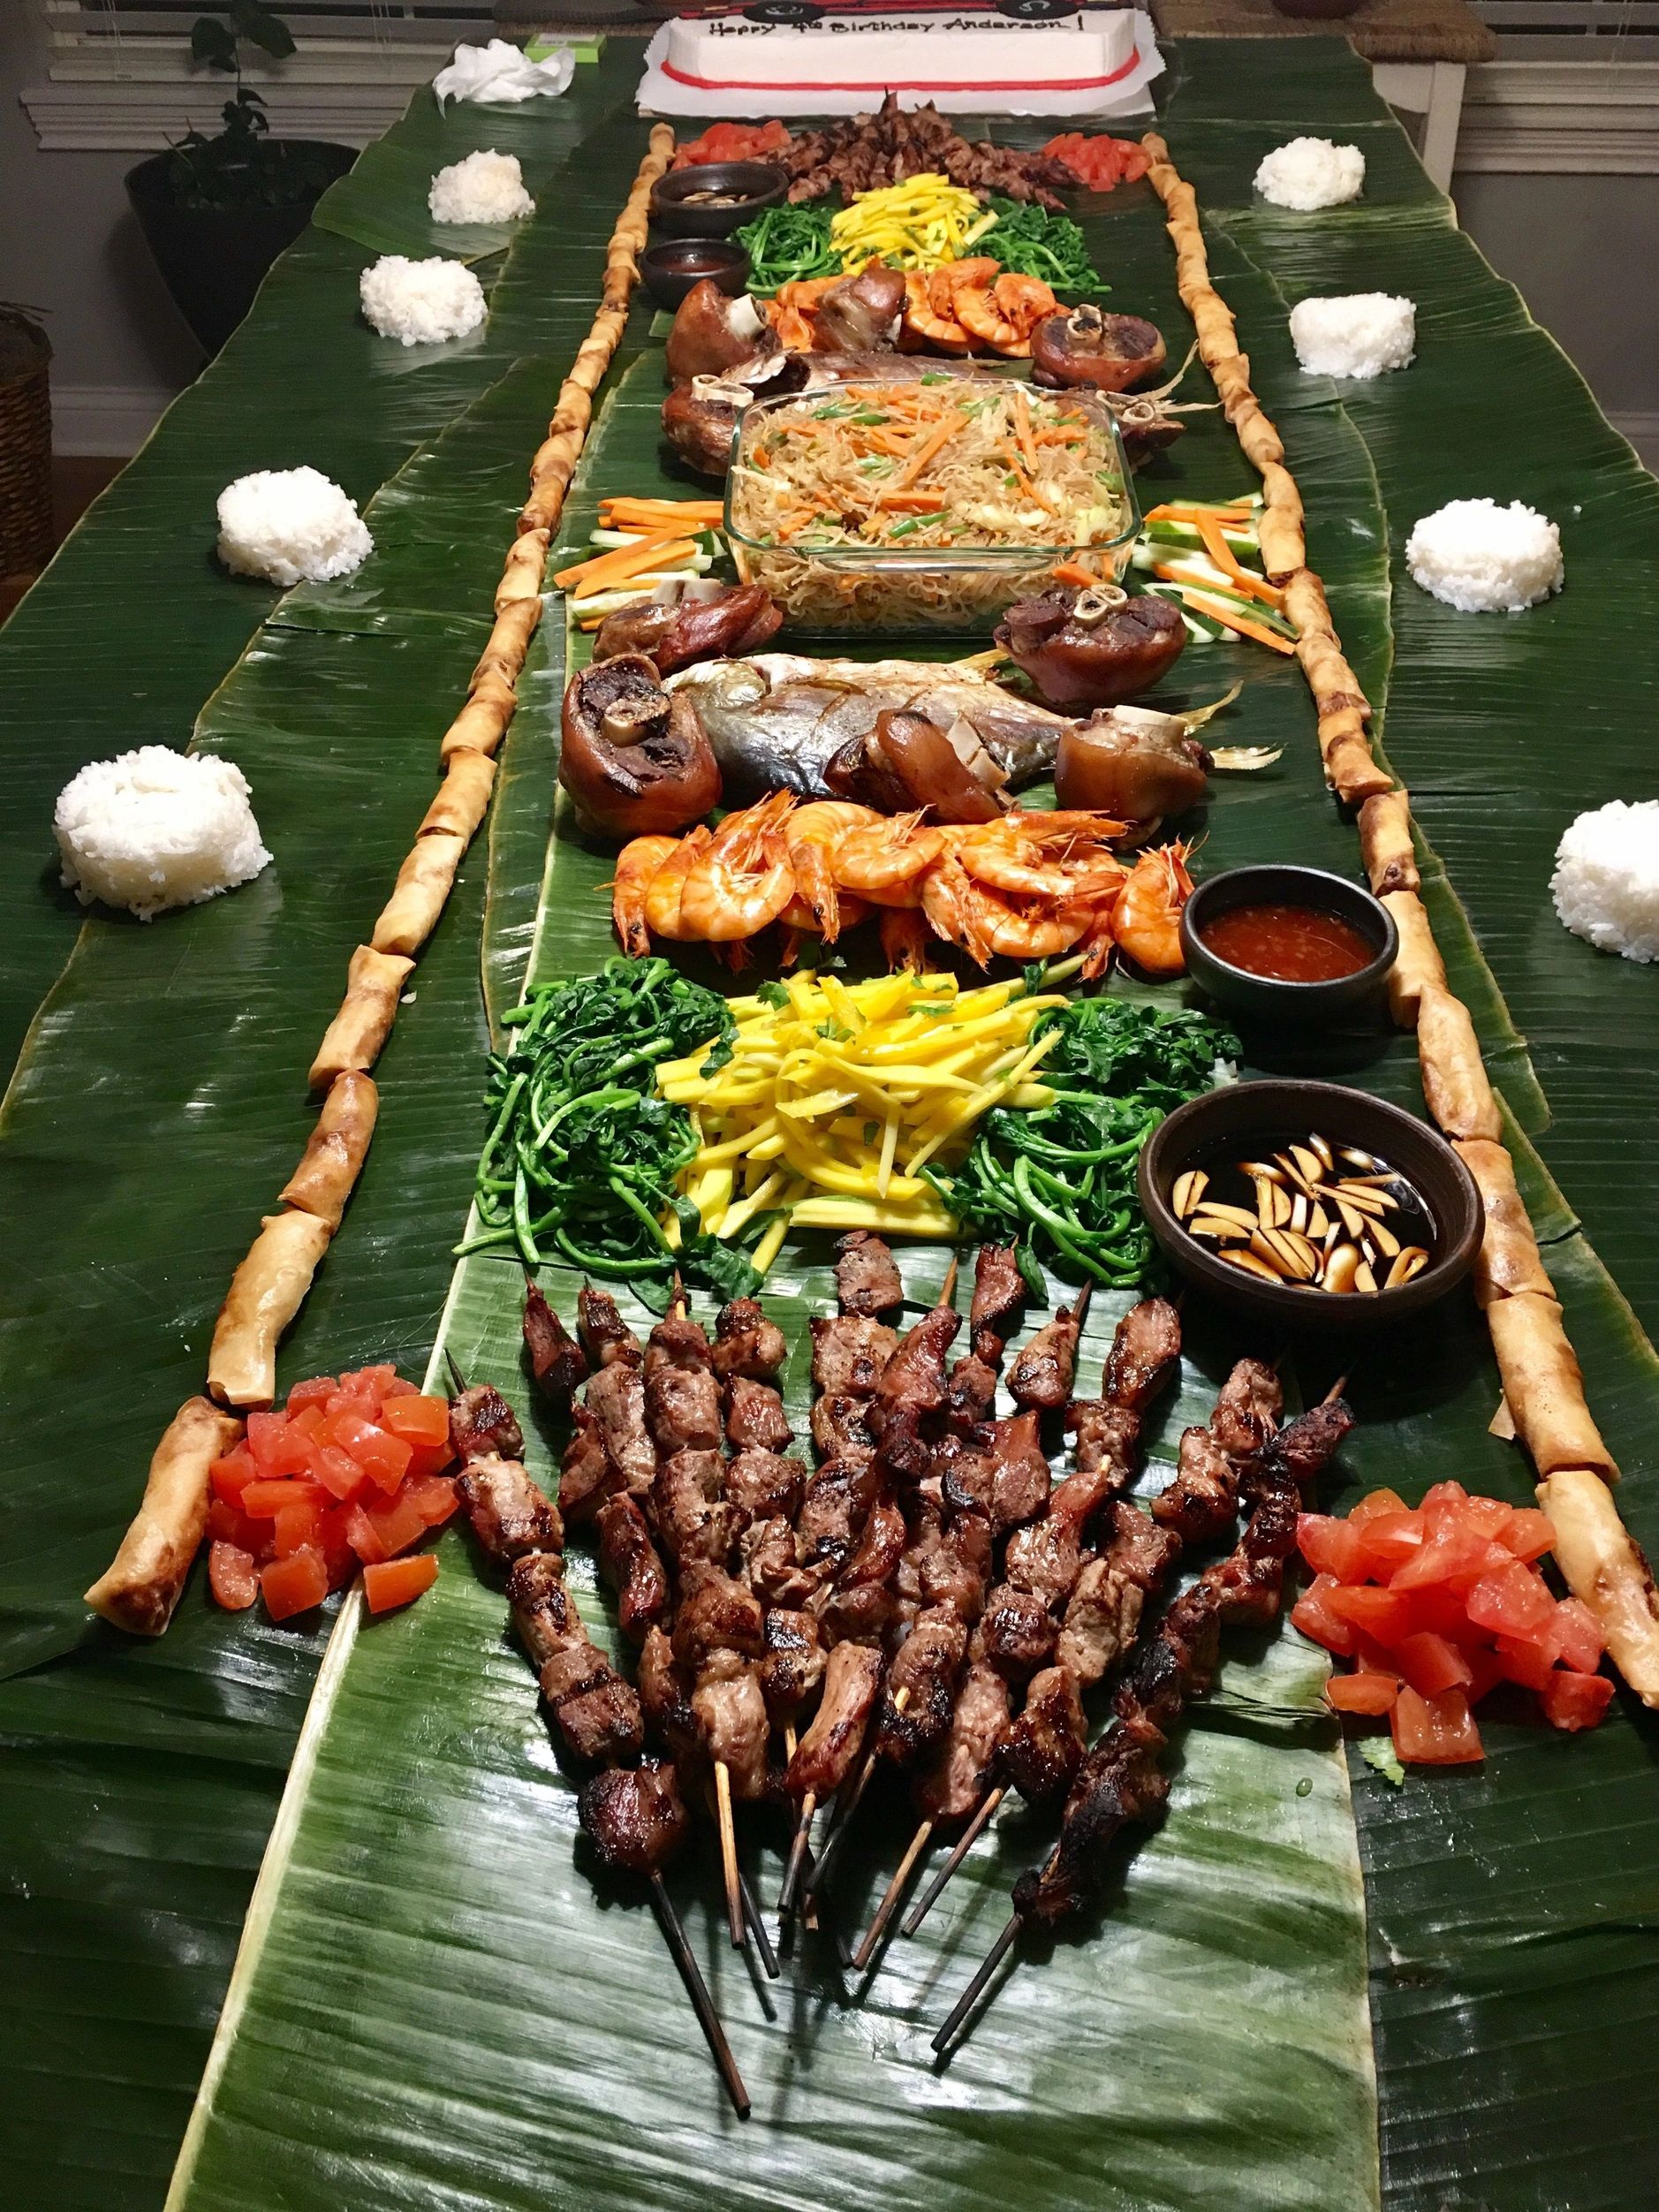 BUDOL FIGHT ! 
TRADITIONAL FILIPINO SHARING OF MEAL